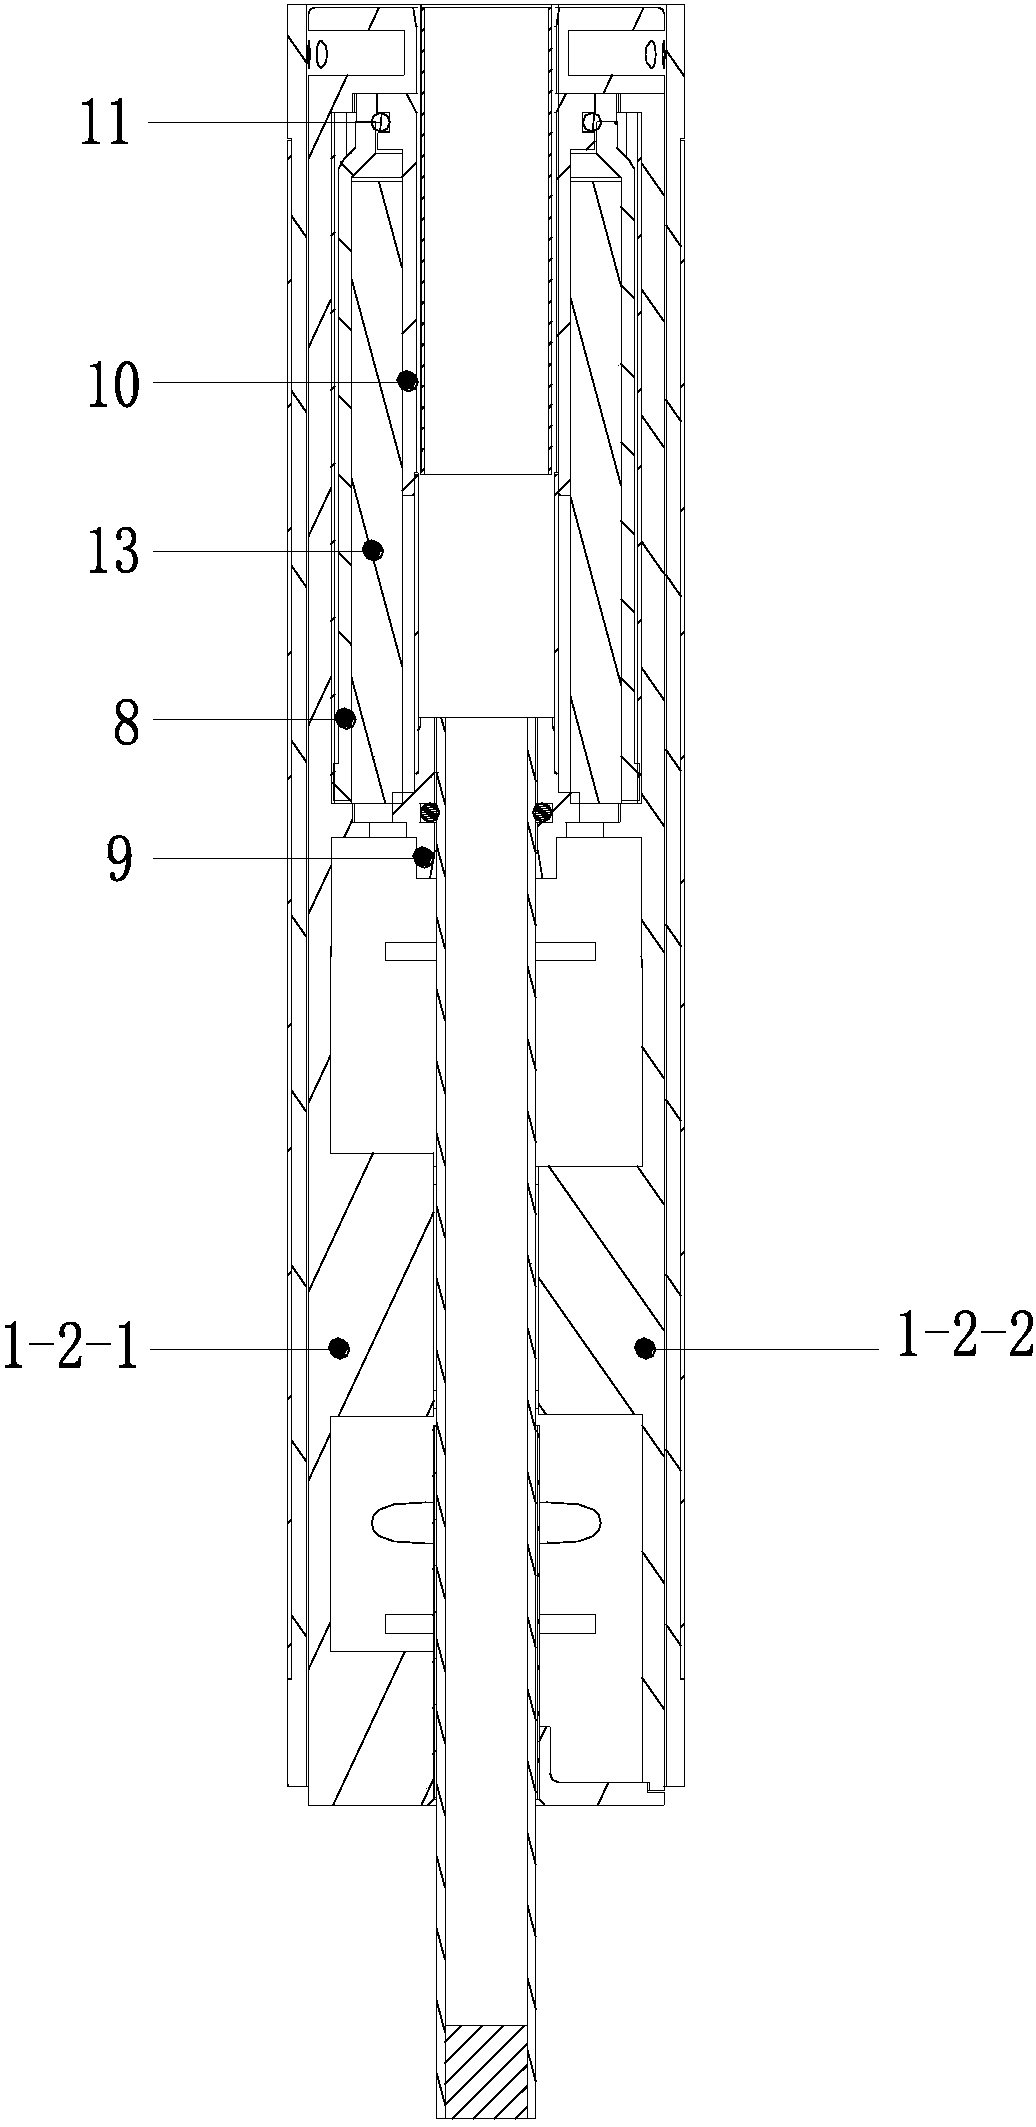 Low temperature smoking device with two-way ejection of air pipe and cigarette